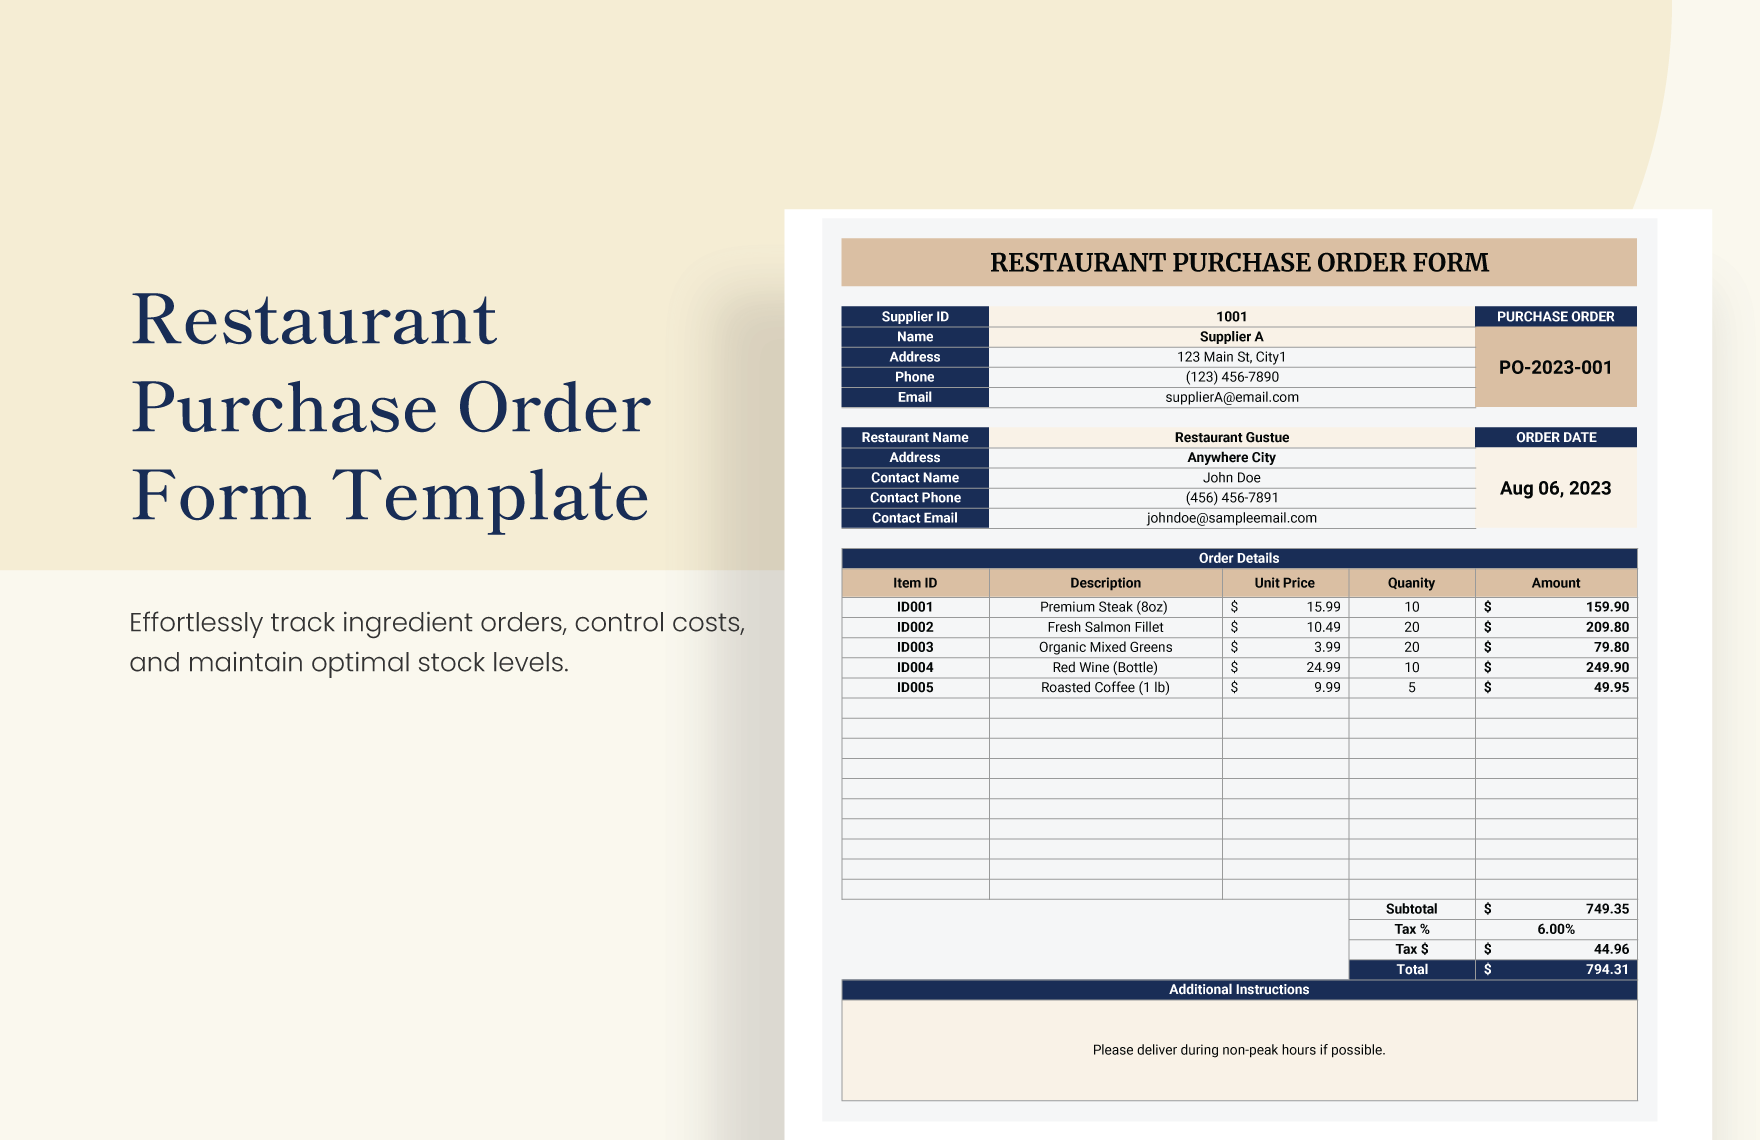 Restaurant Purchase Order Form Template